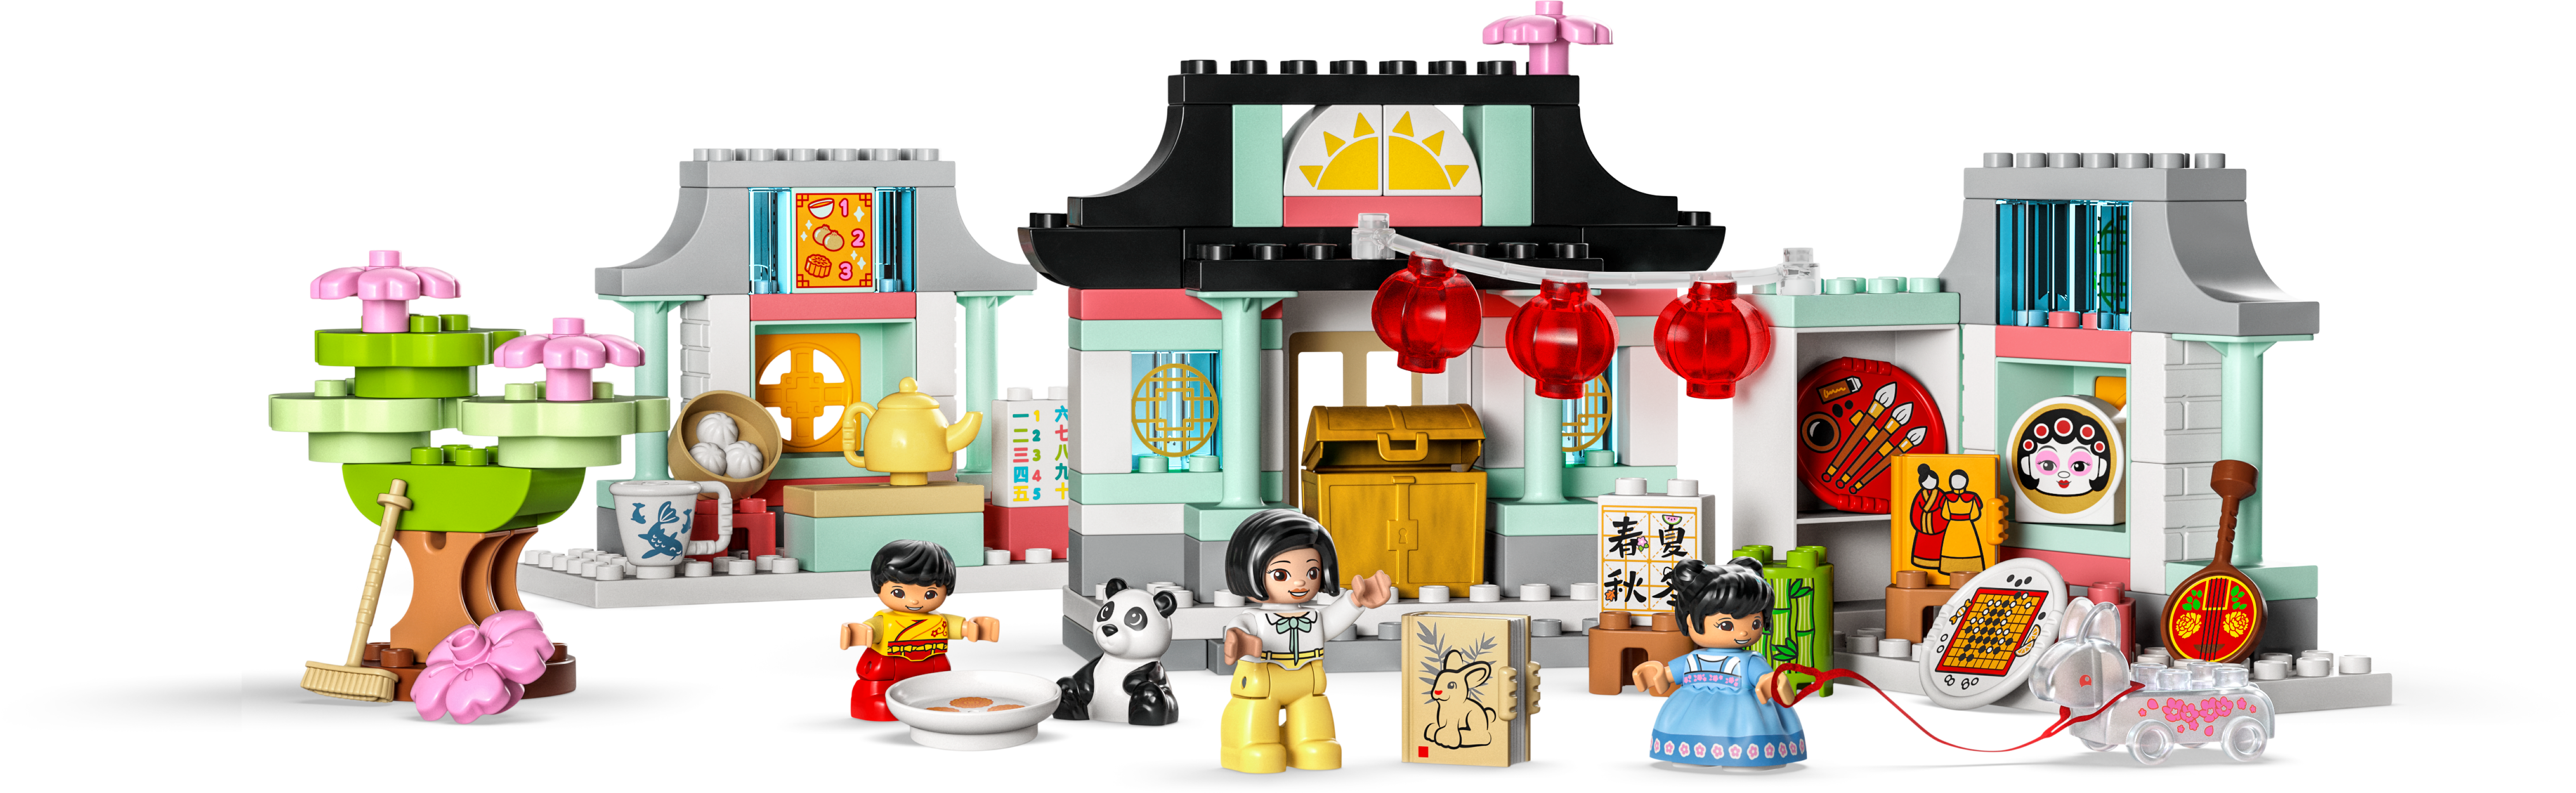 Learn About Chinese Culture 10411 | DUPLO® | online at Official LEGO® Shop US